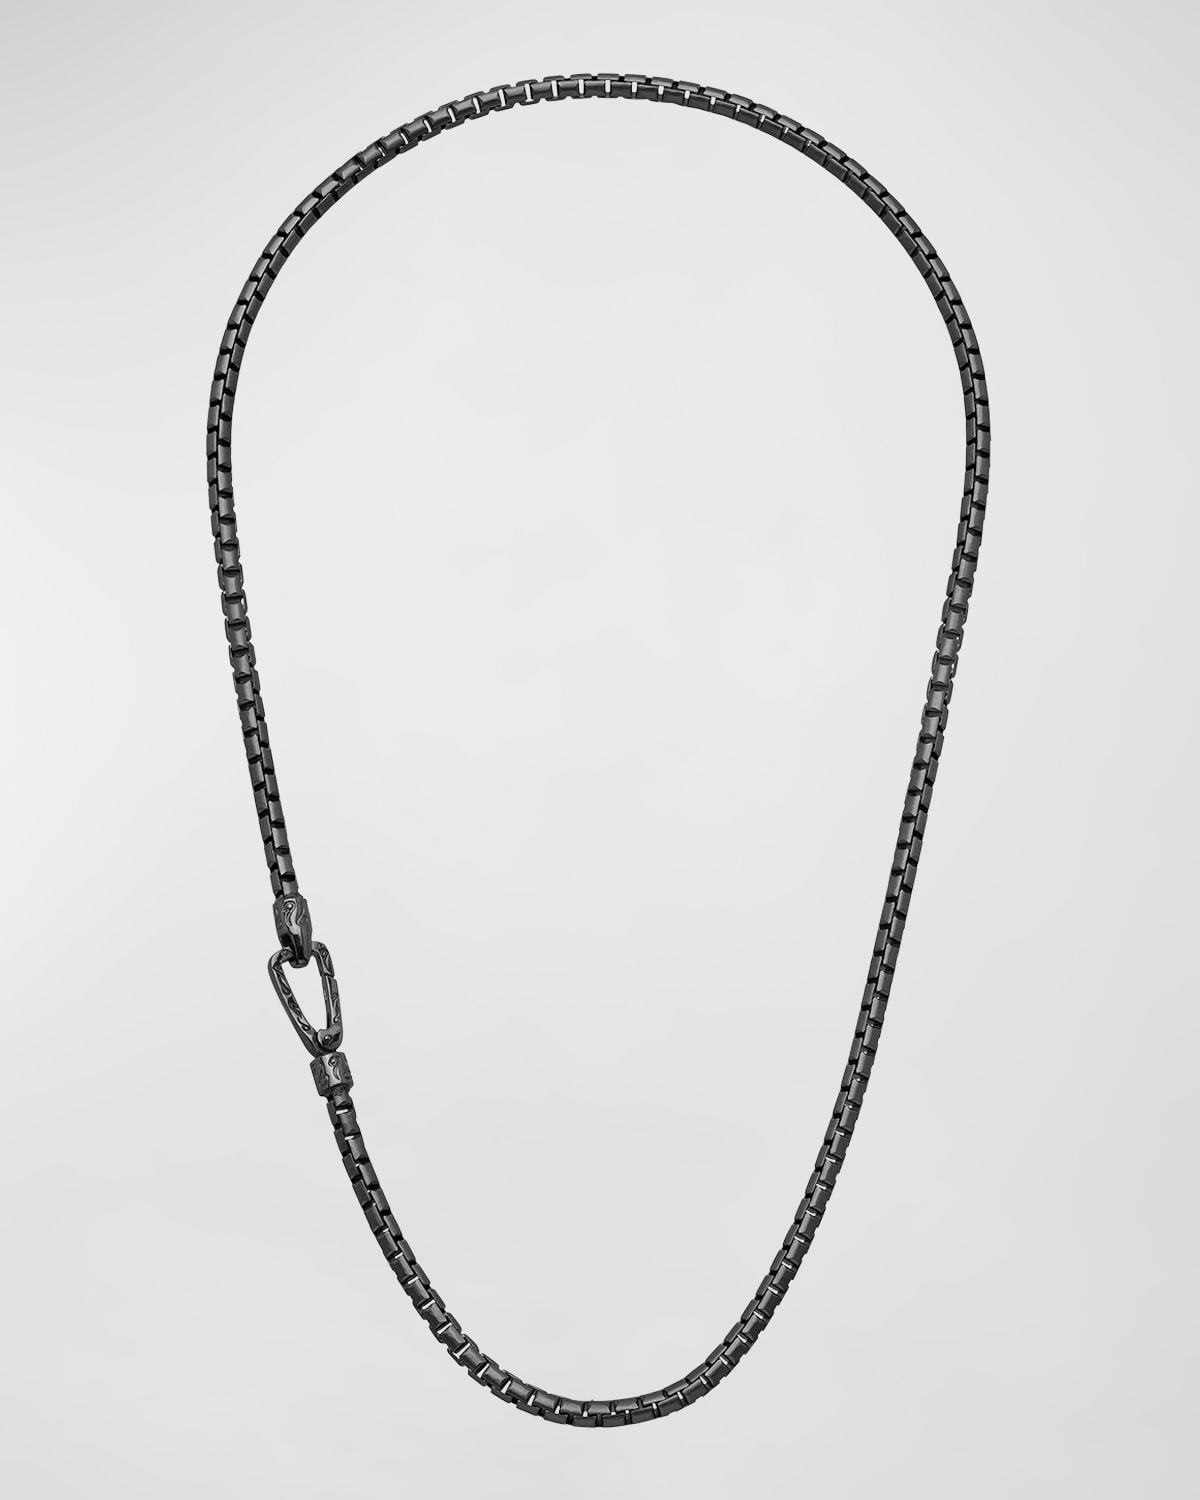 Marco Dal Maso Carved Tubular Burnished Silver Necklace with Matte Chain and Polished Clasp, 20"L